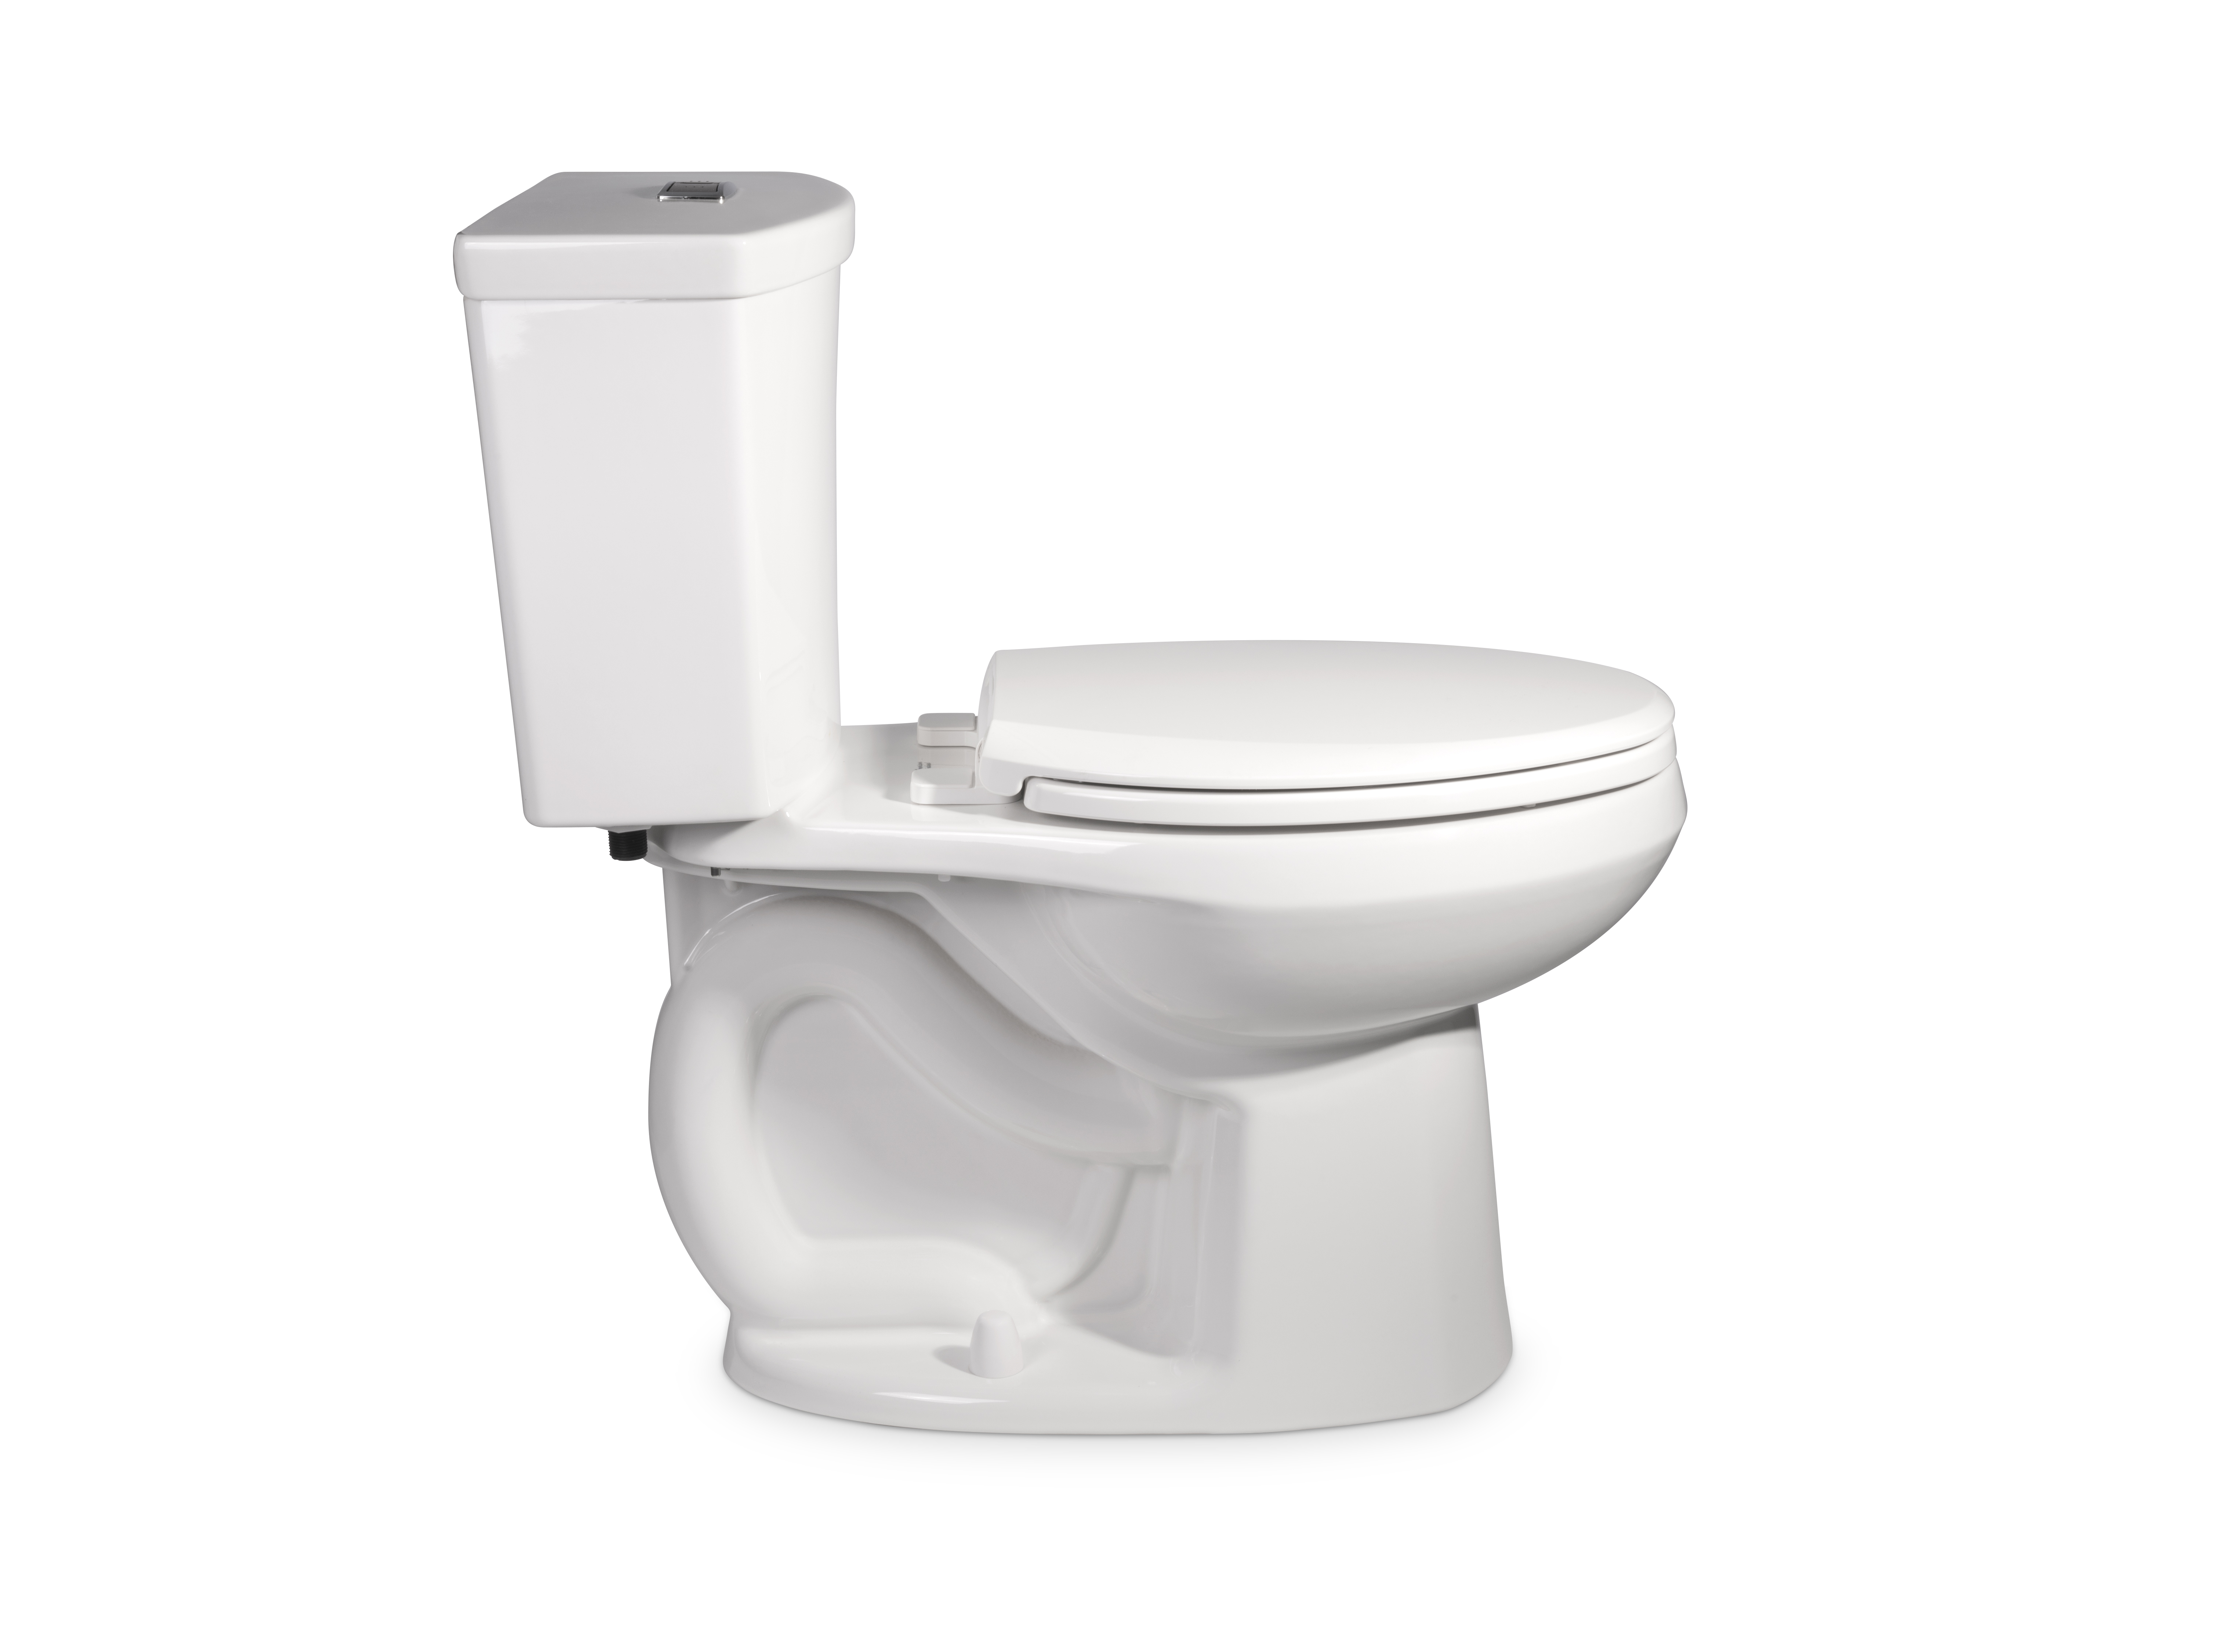 Ravenna 3 Two-Piece Dual Flush 1.6 gpf/6.0 Lpf and 1.0 gpf/3.8 Lpf Chair Height Elongated Complete Toilet With Seat and Lined Tank